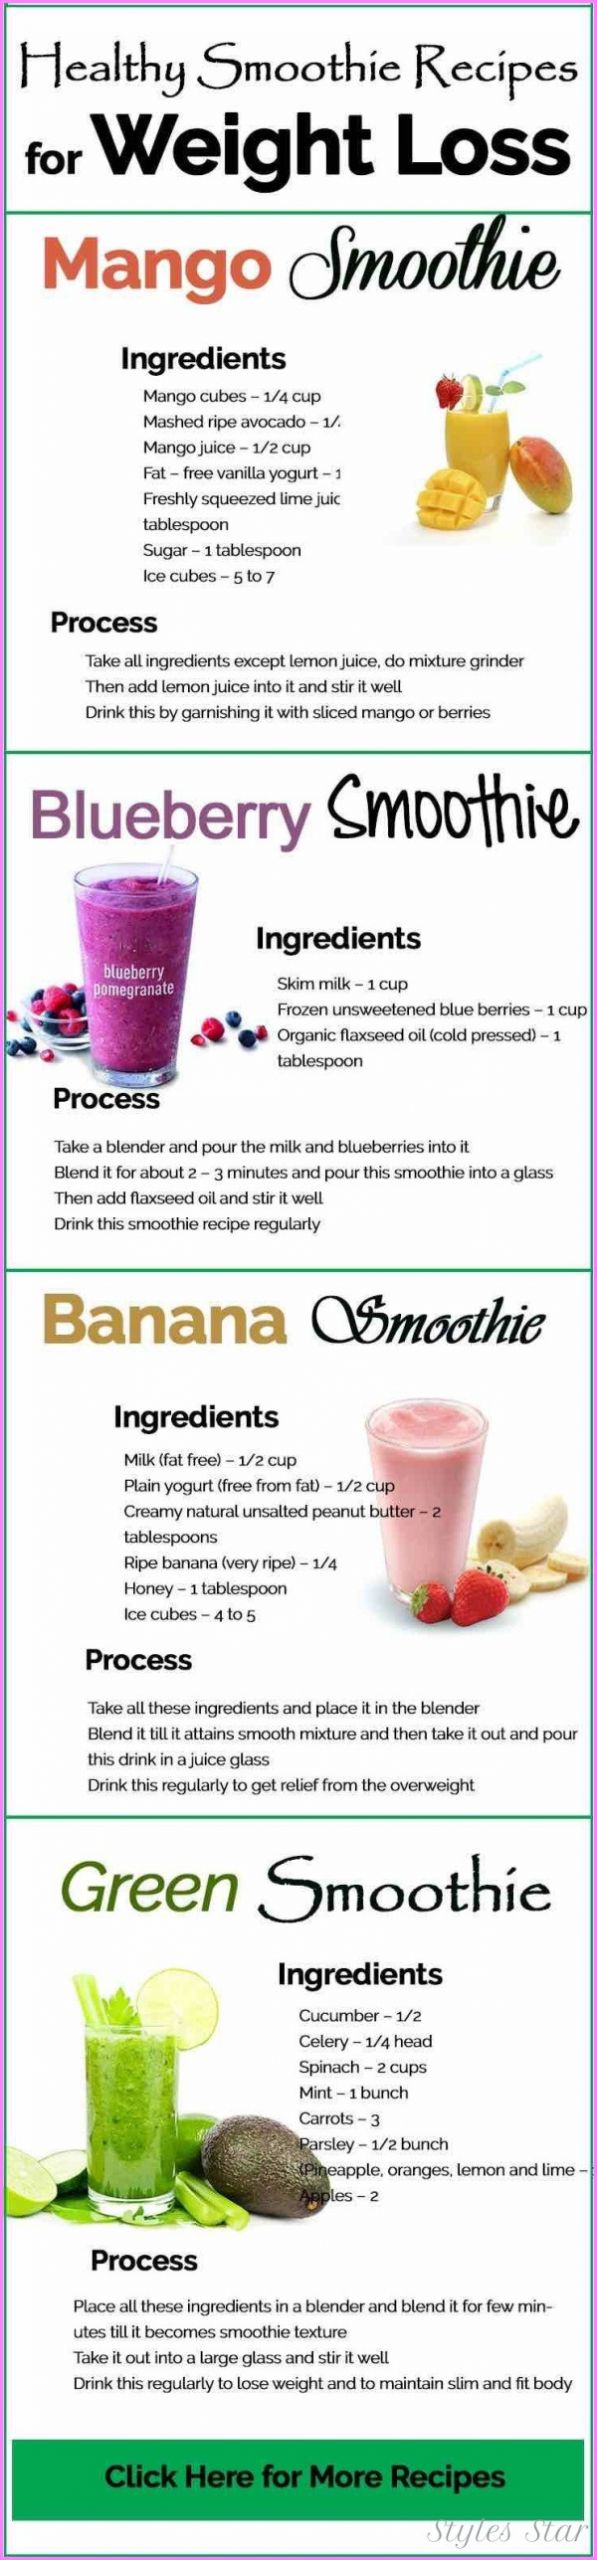 Nutribullet Recipes For Weight Loss
 Nutribullet Recipes To Lose Weight Star Styles